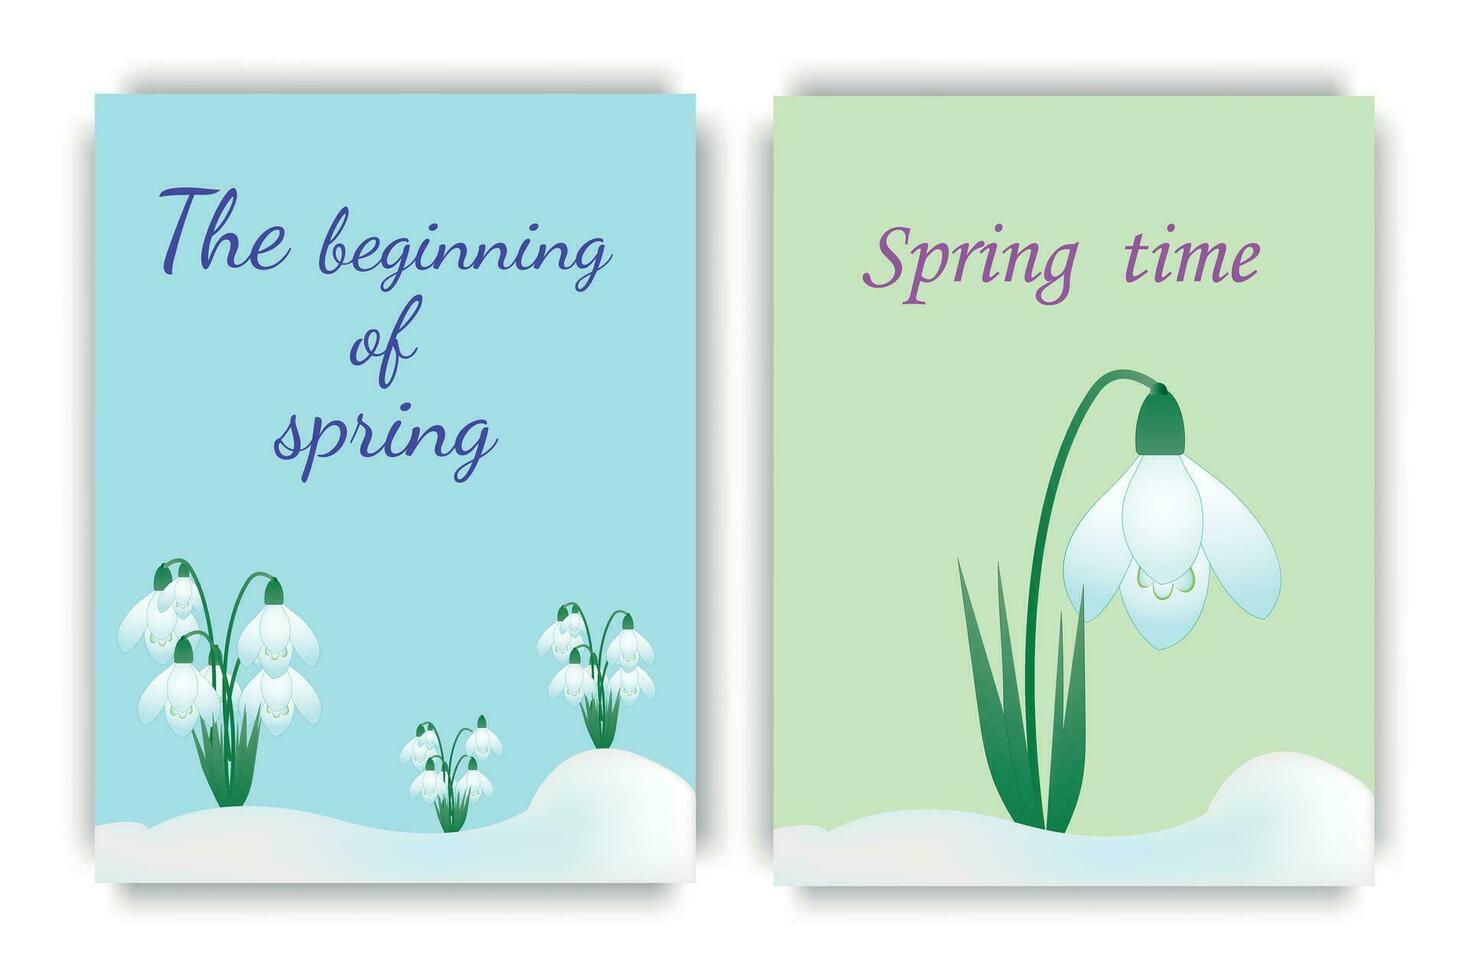 Poster with snowdrops, describes the beginning of spring, warmth and sun. Vector illustration.